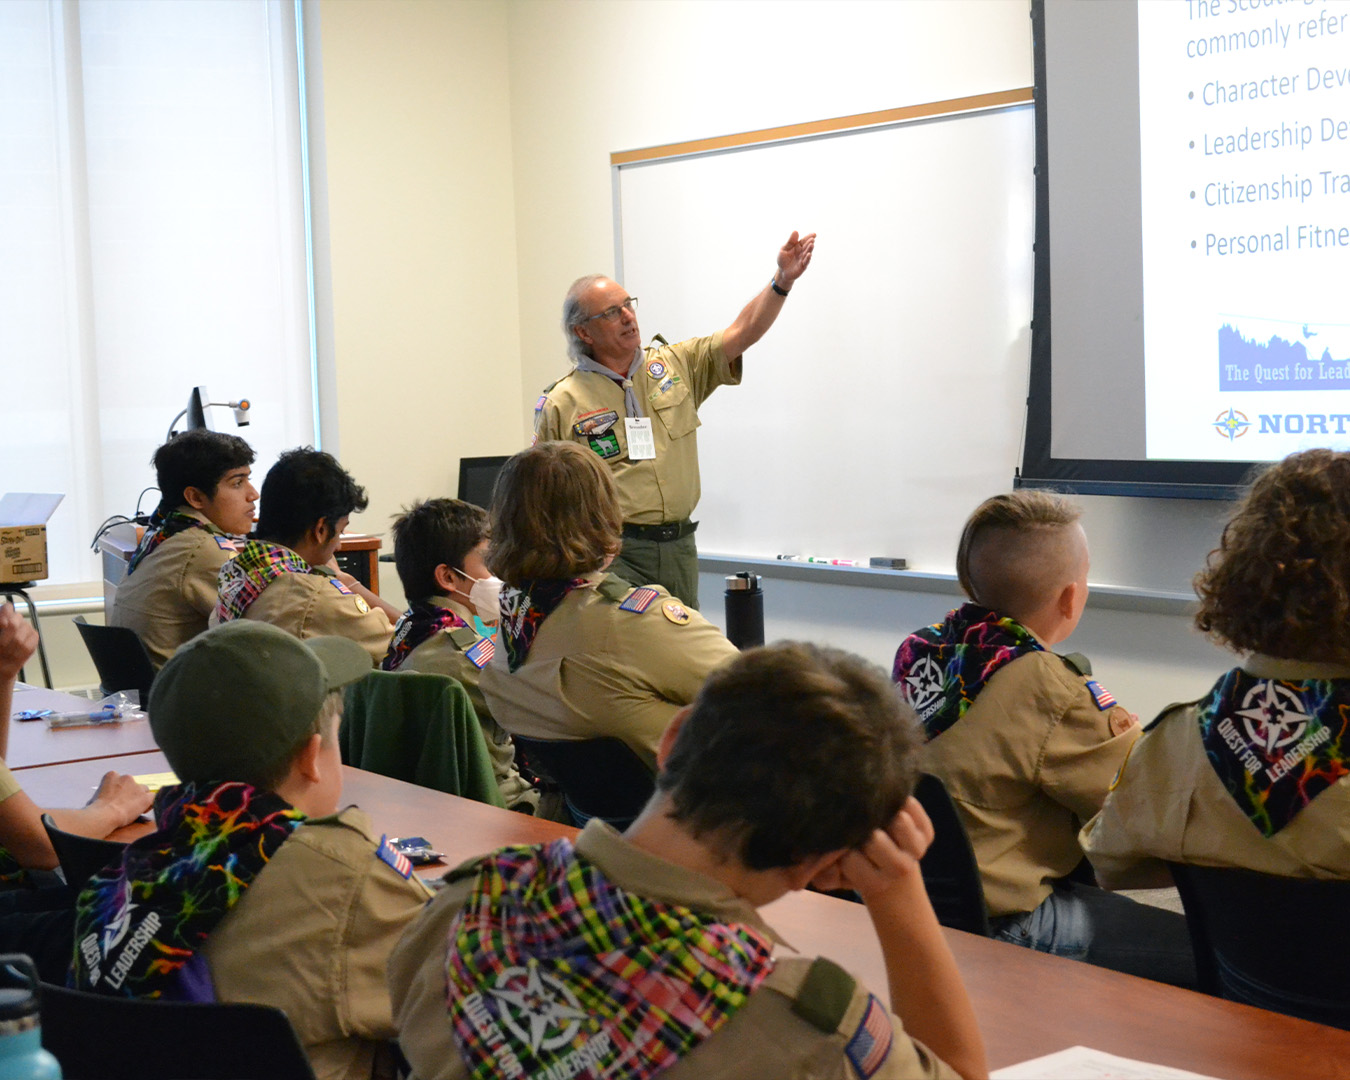 A large group of Scouts in uniform are sitting at desks in a classroom while an adult leader is pointing to a lesson slide outside of the frame